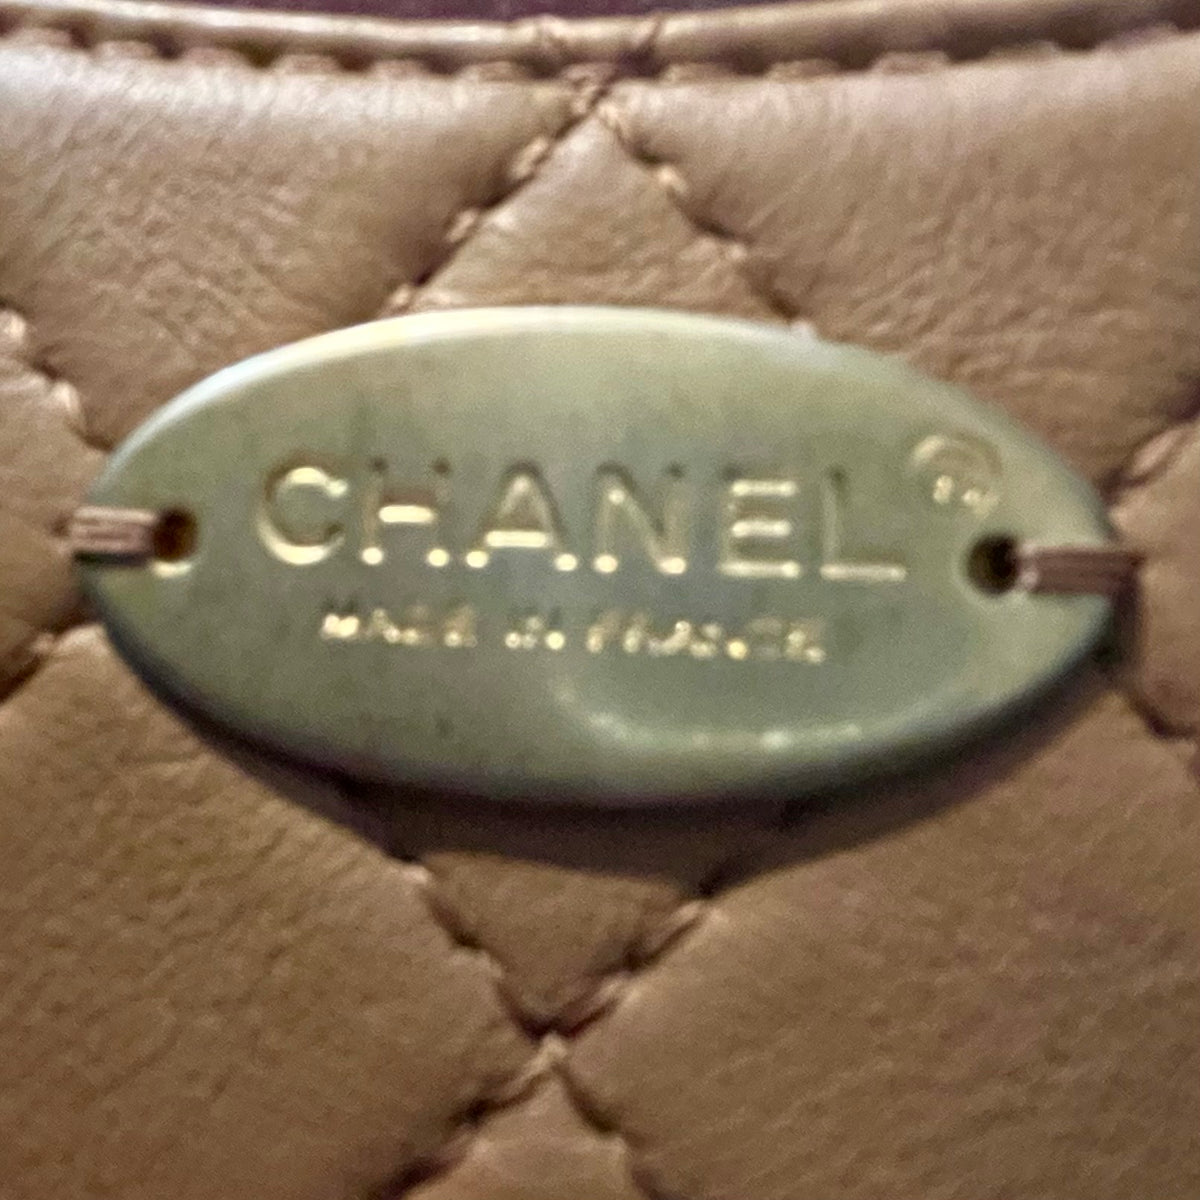 CHANEL Beige Calfskin Quilted Multi Pouching Flap and Coin Purse